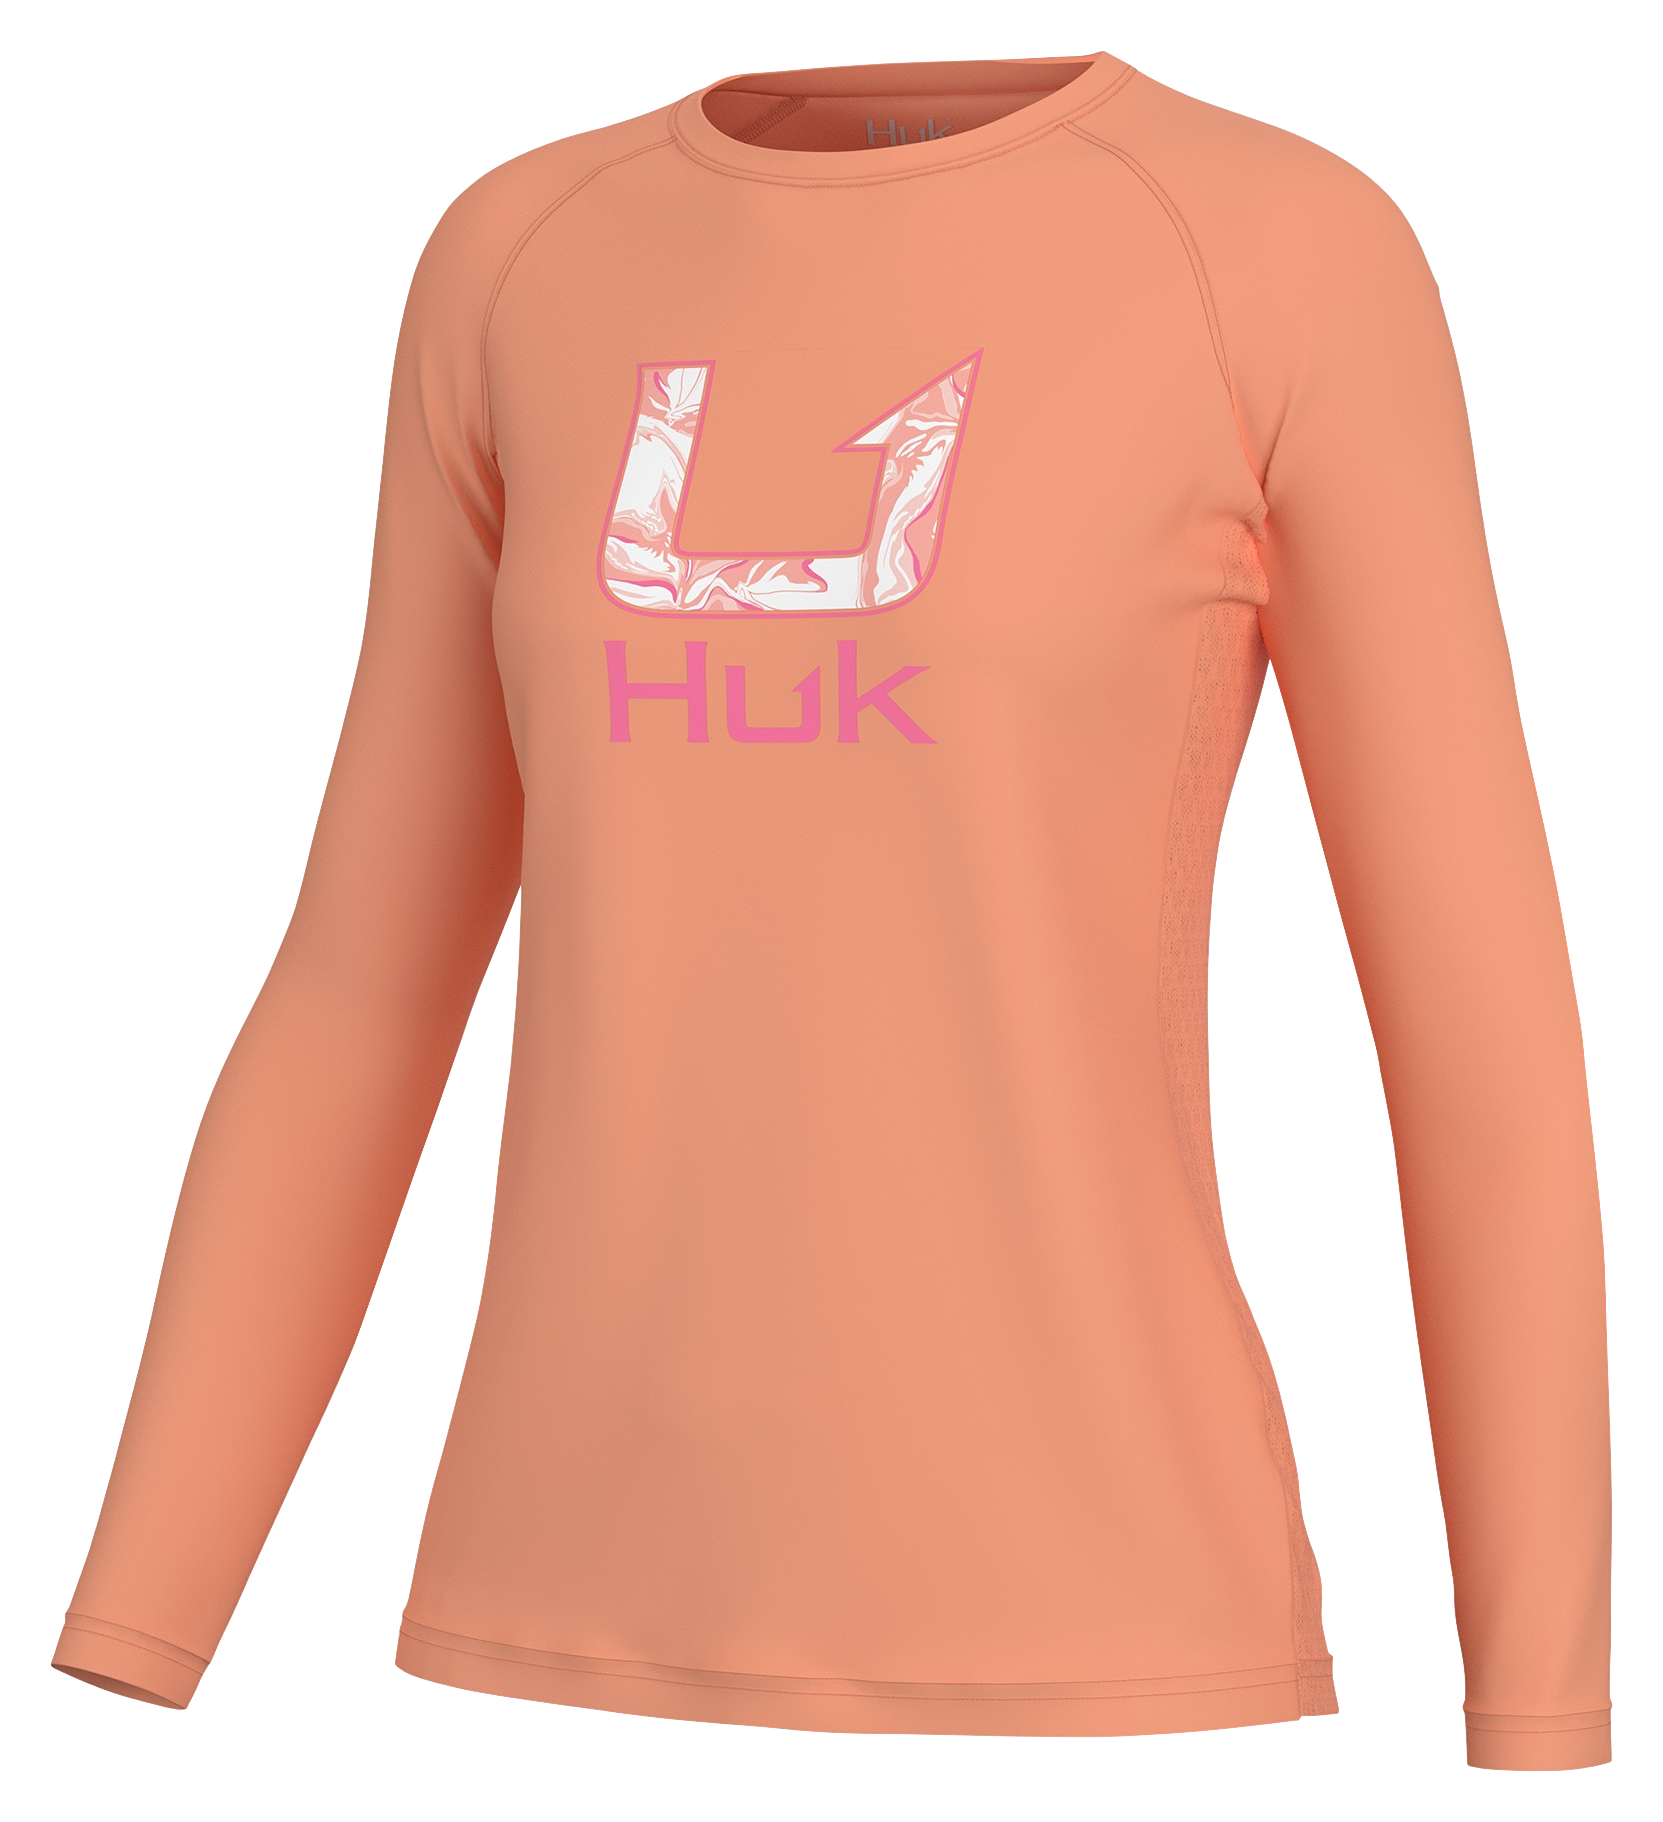 Huk Women's Coral Reef Pursuit Vented Brackish Fill Long Sleeve Shirt